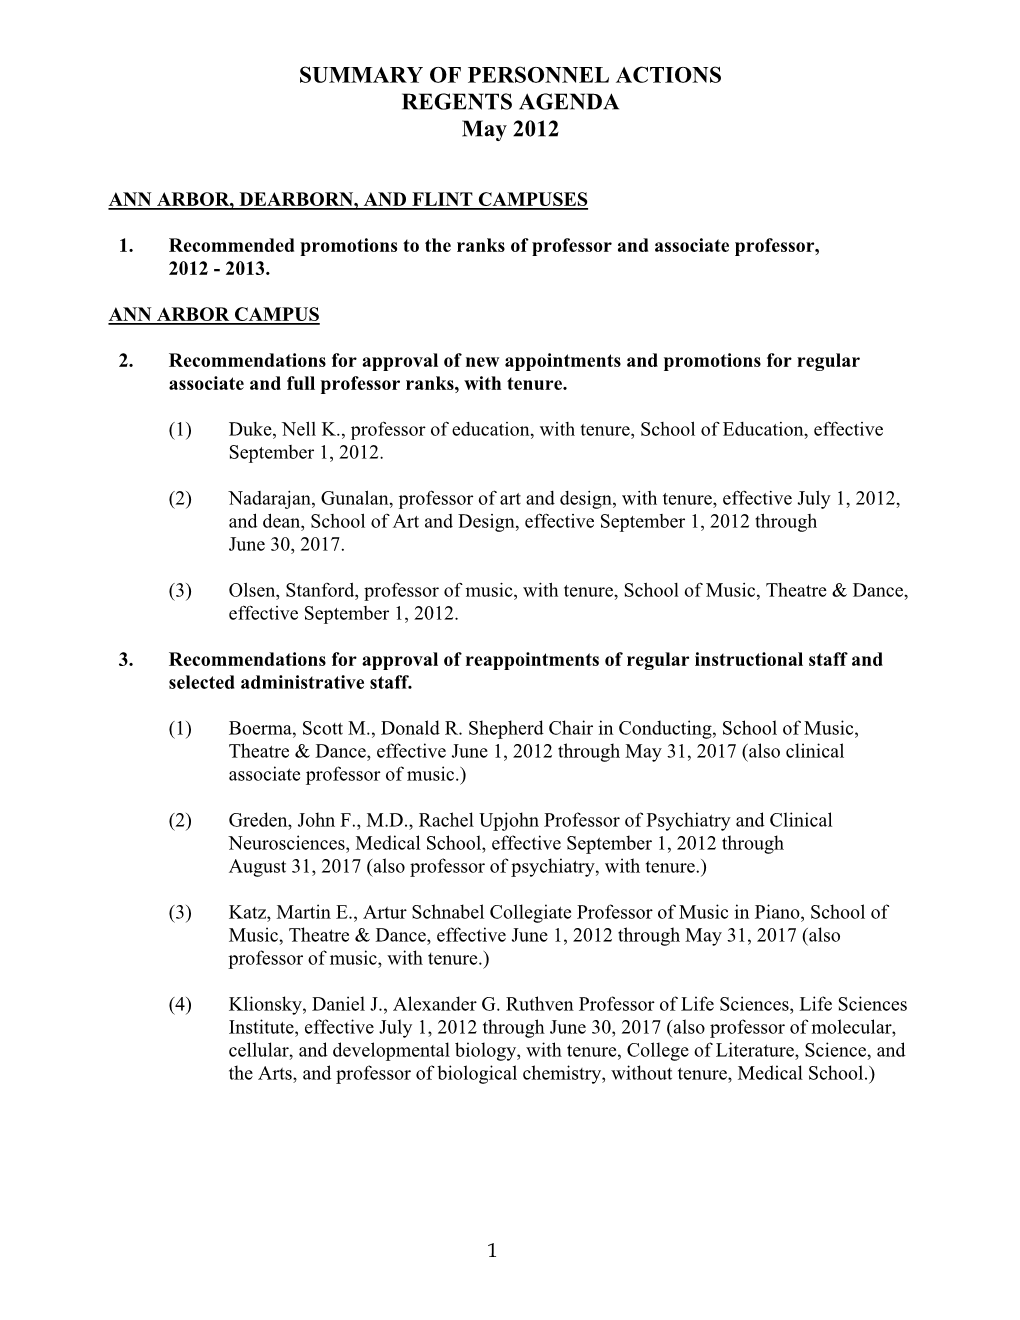 SUMMARY of PERSONNEL ACTIONS REGENTS AGENDA May 2012